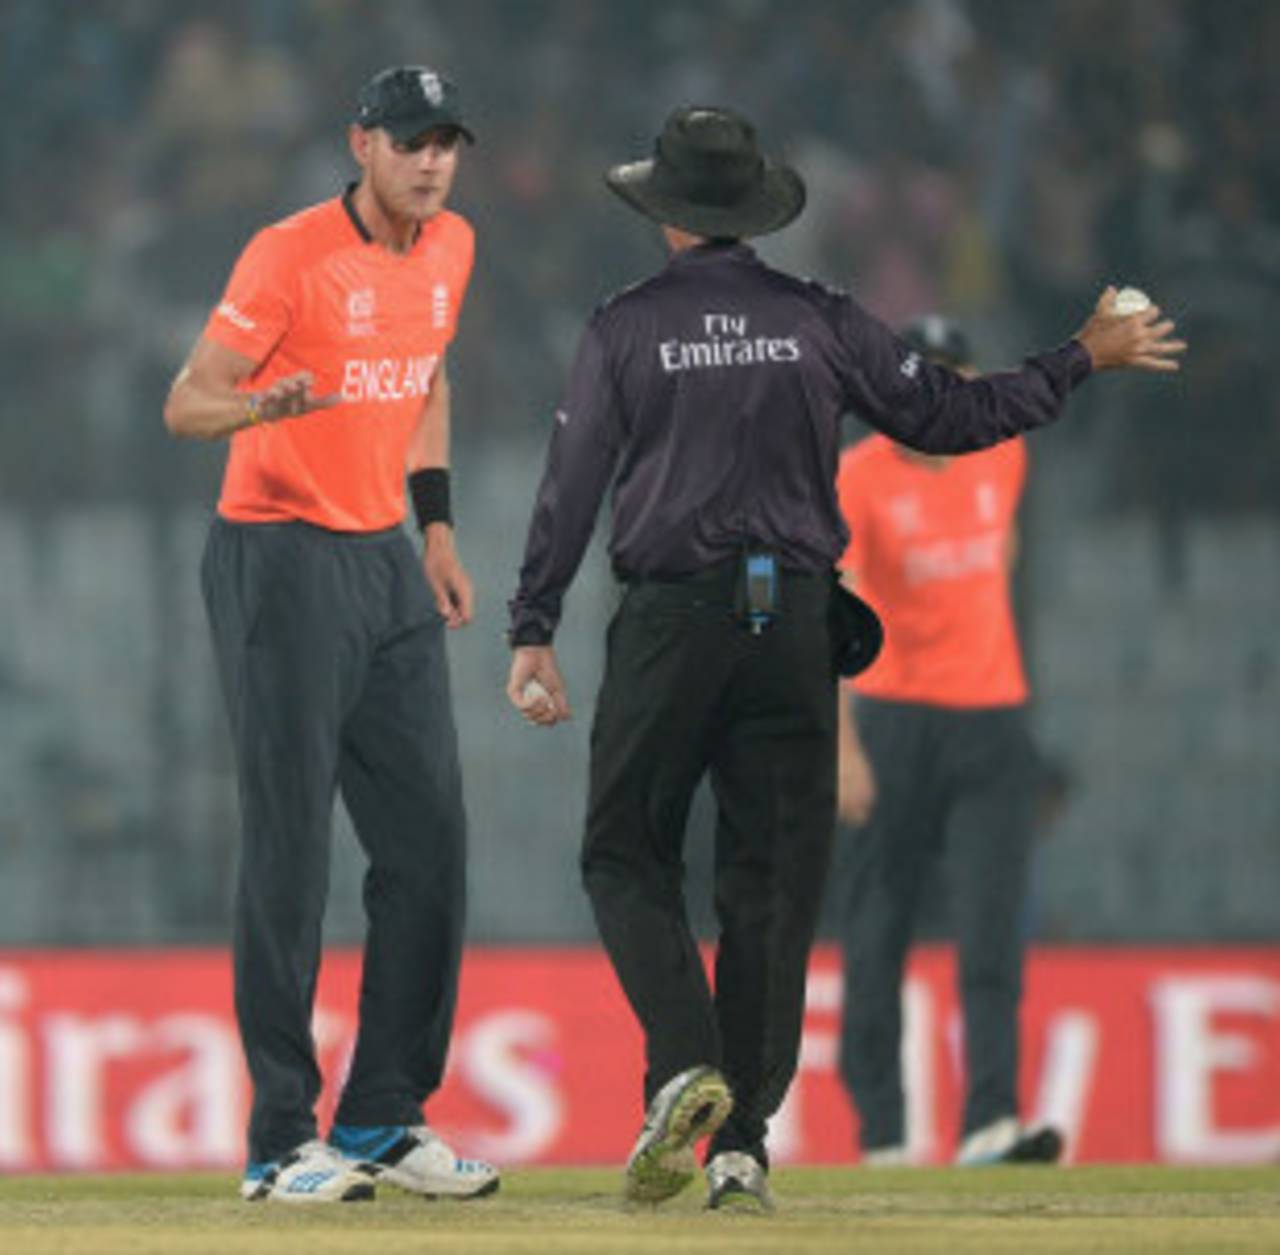 Stuart Broad has a word with the umpire after Mahela Jayawardene is given not out after a disputed low catch from Michael Lumb&nbsp;&nbsp;&bull;&nbsp;&nbsp;Getty Images